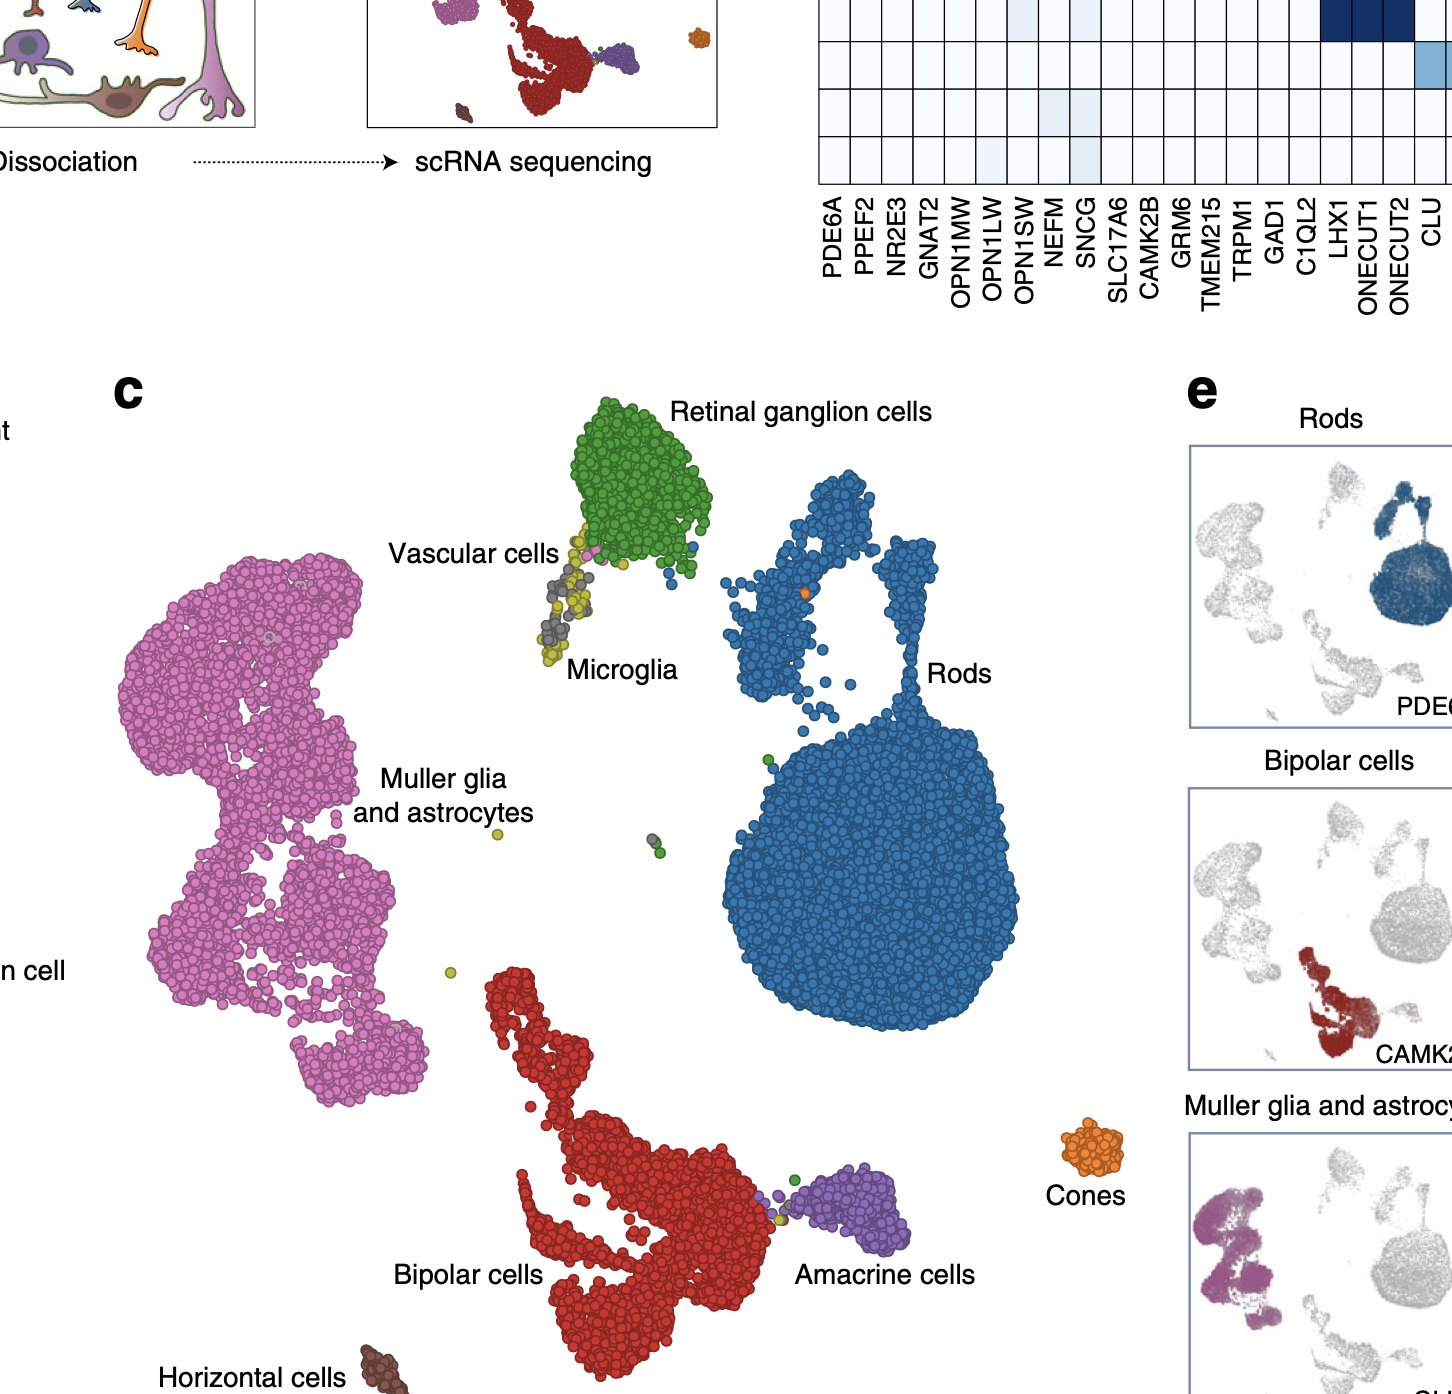 Single-cell transcriptomic atlas of the human retina identifies cell types associated with age-related macular degeneration